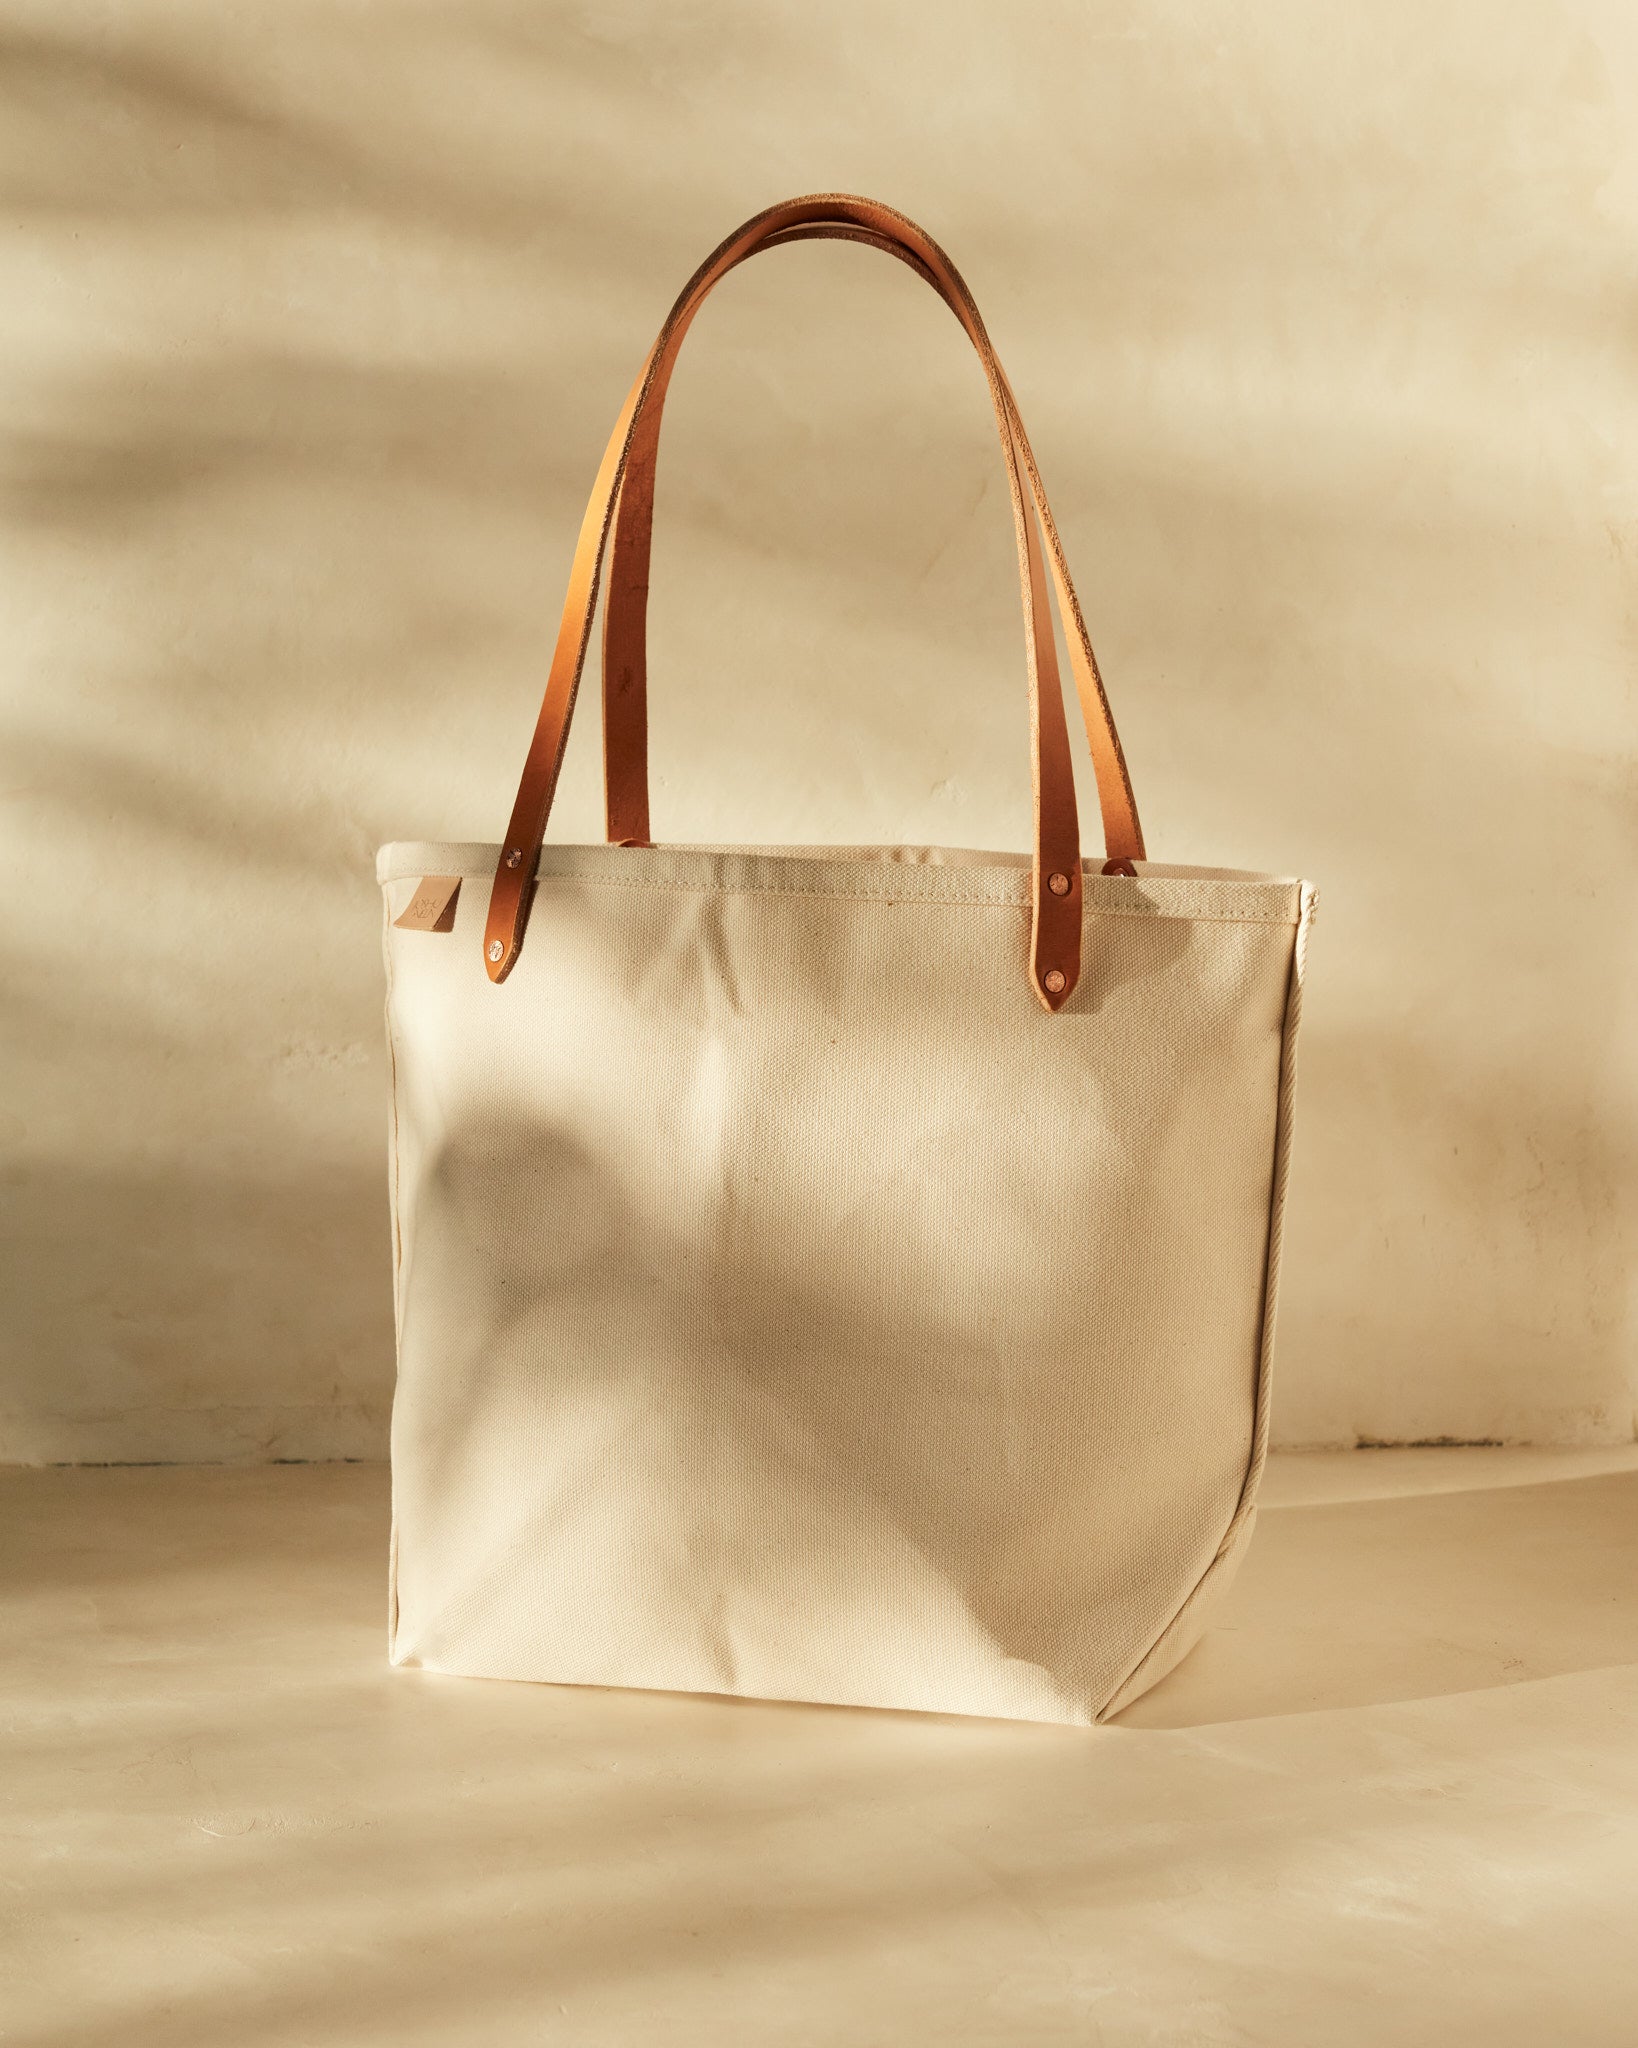 My Other Bag” Classic Tote $38